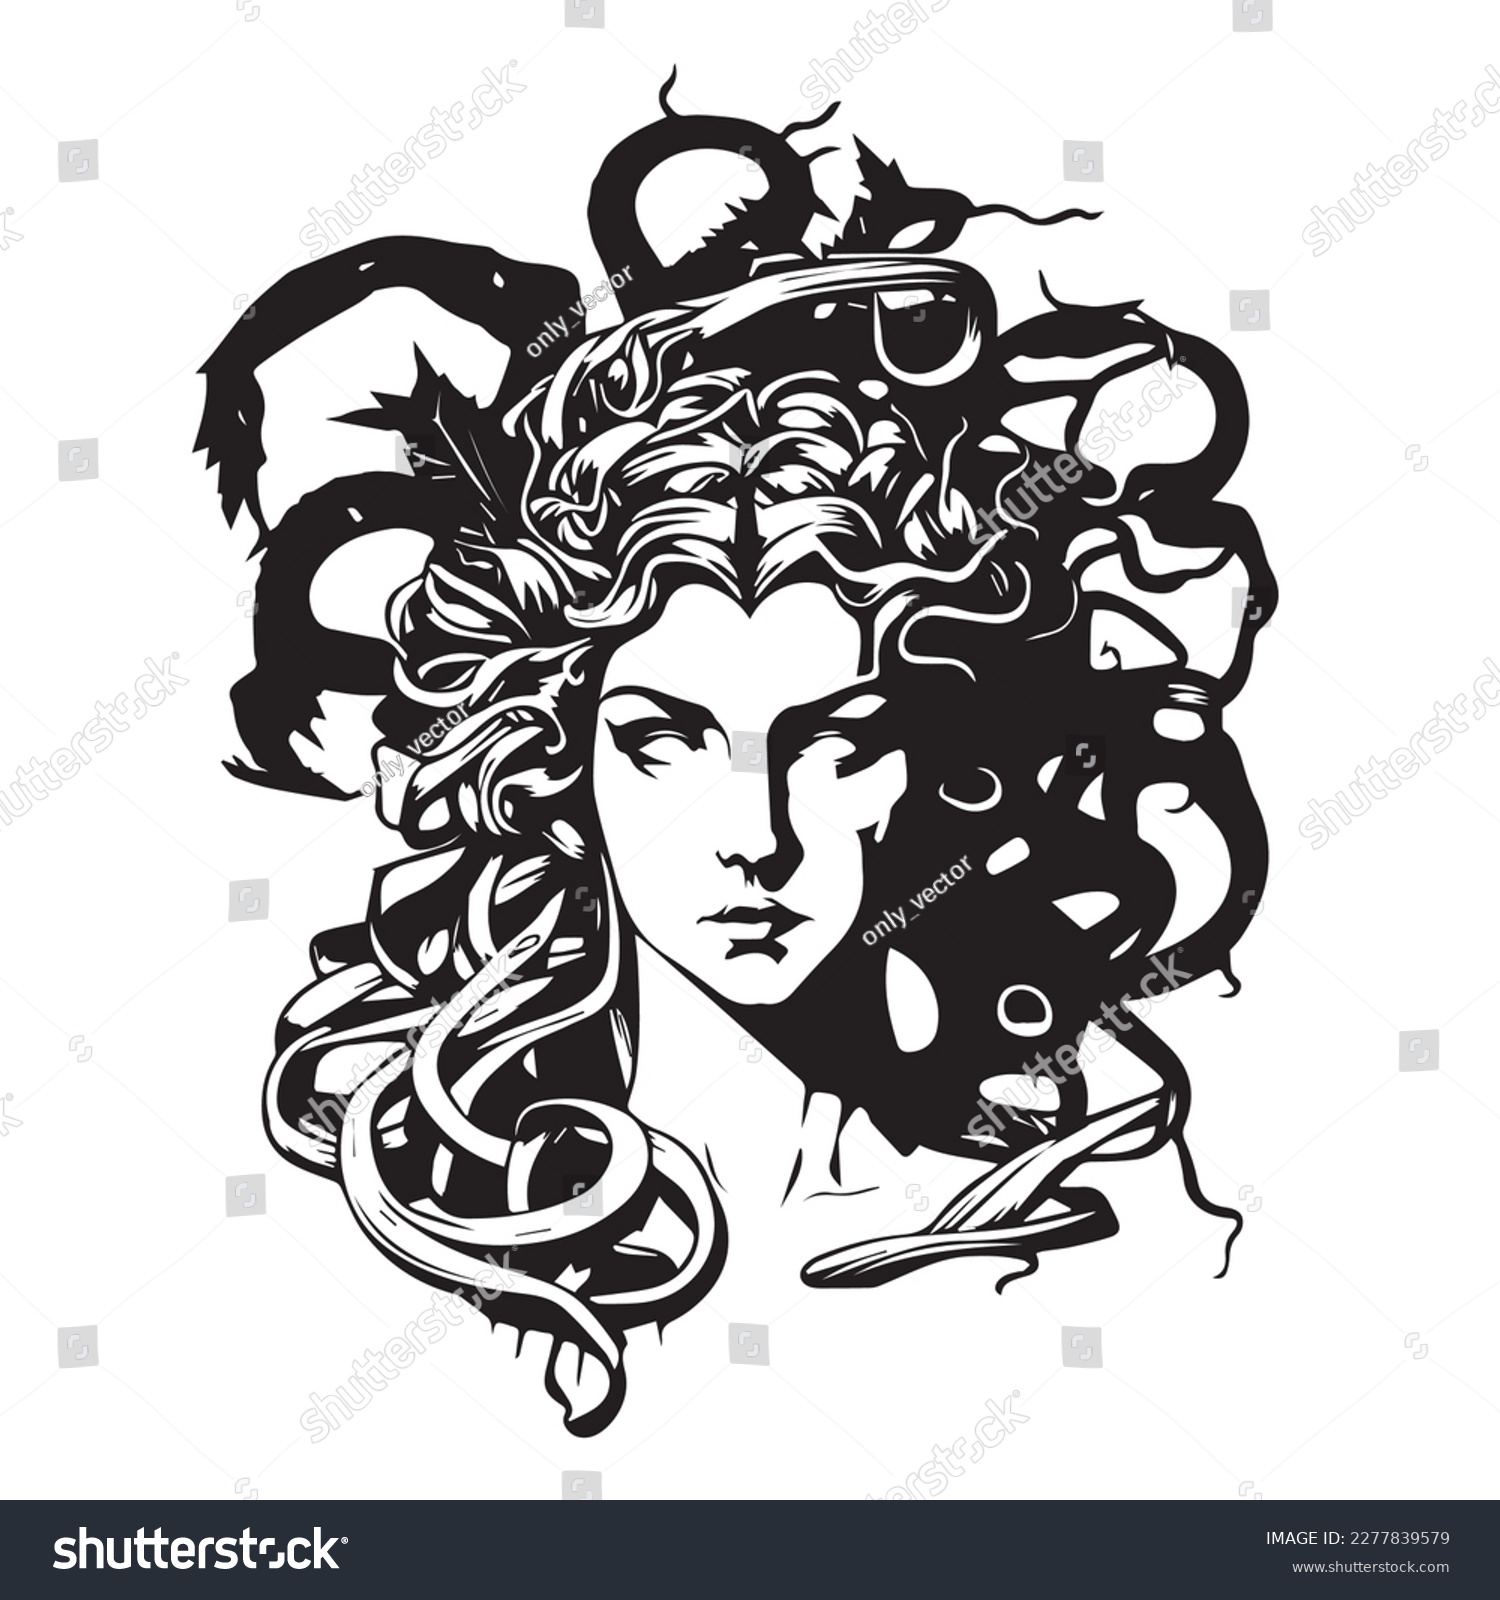 SVG of Ancient greek Gorgon Medusa, woman head logo. Vector illustration of female face. Silhouette svg, only black and white. svg